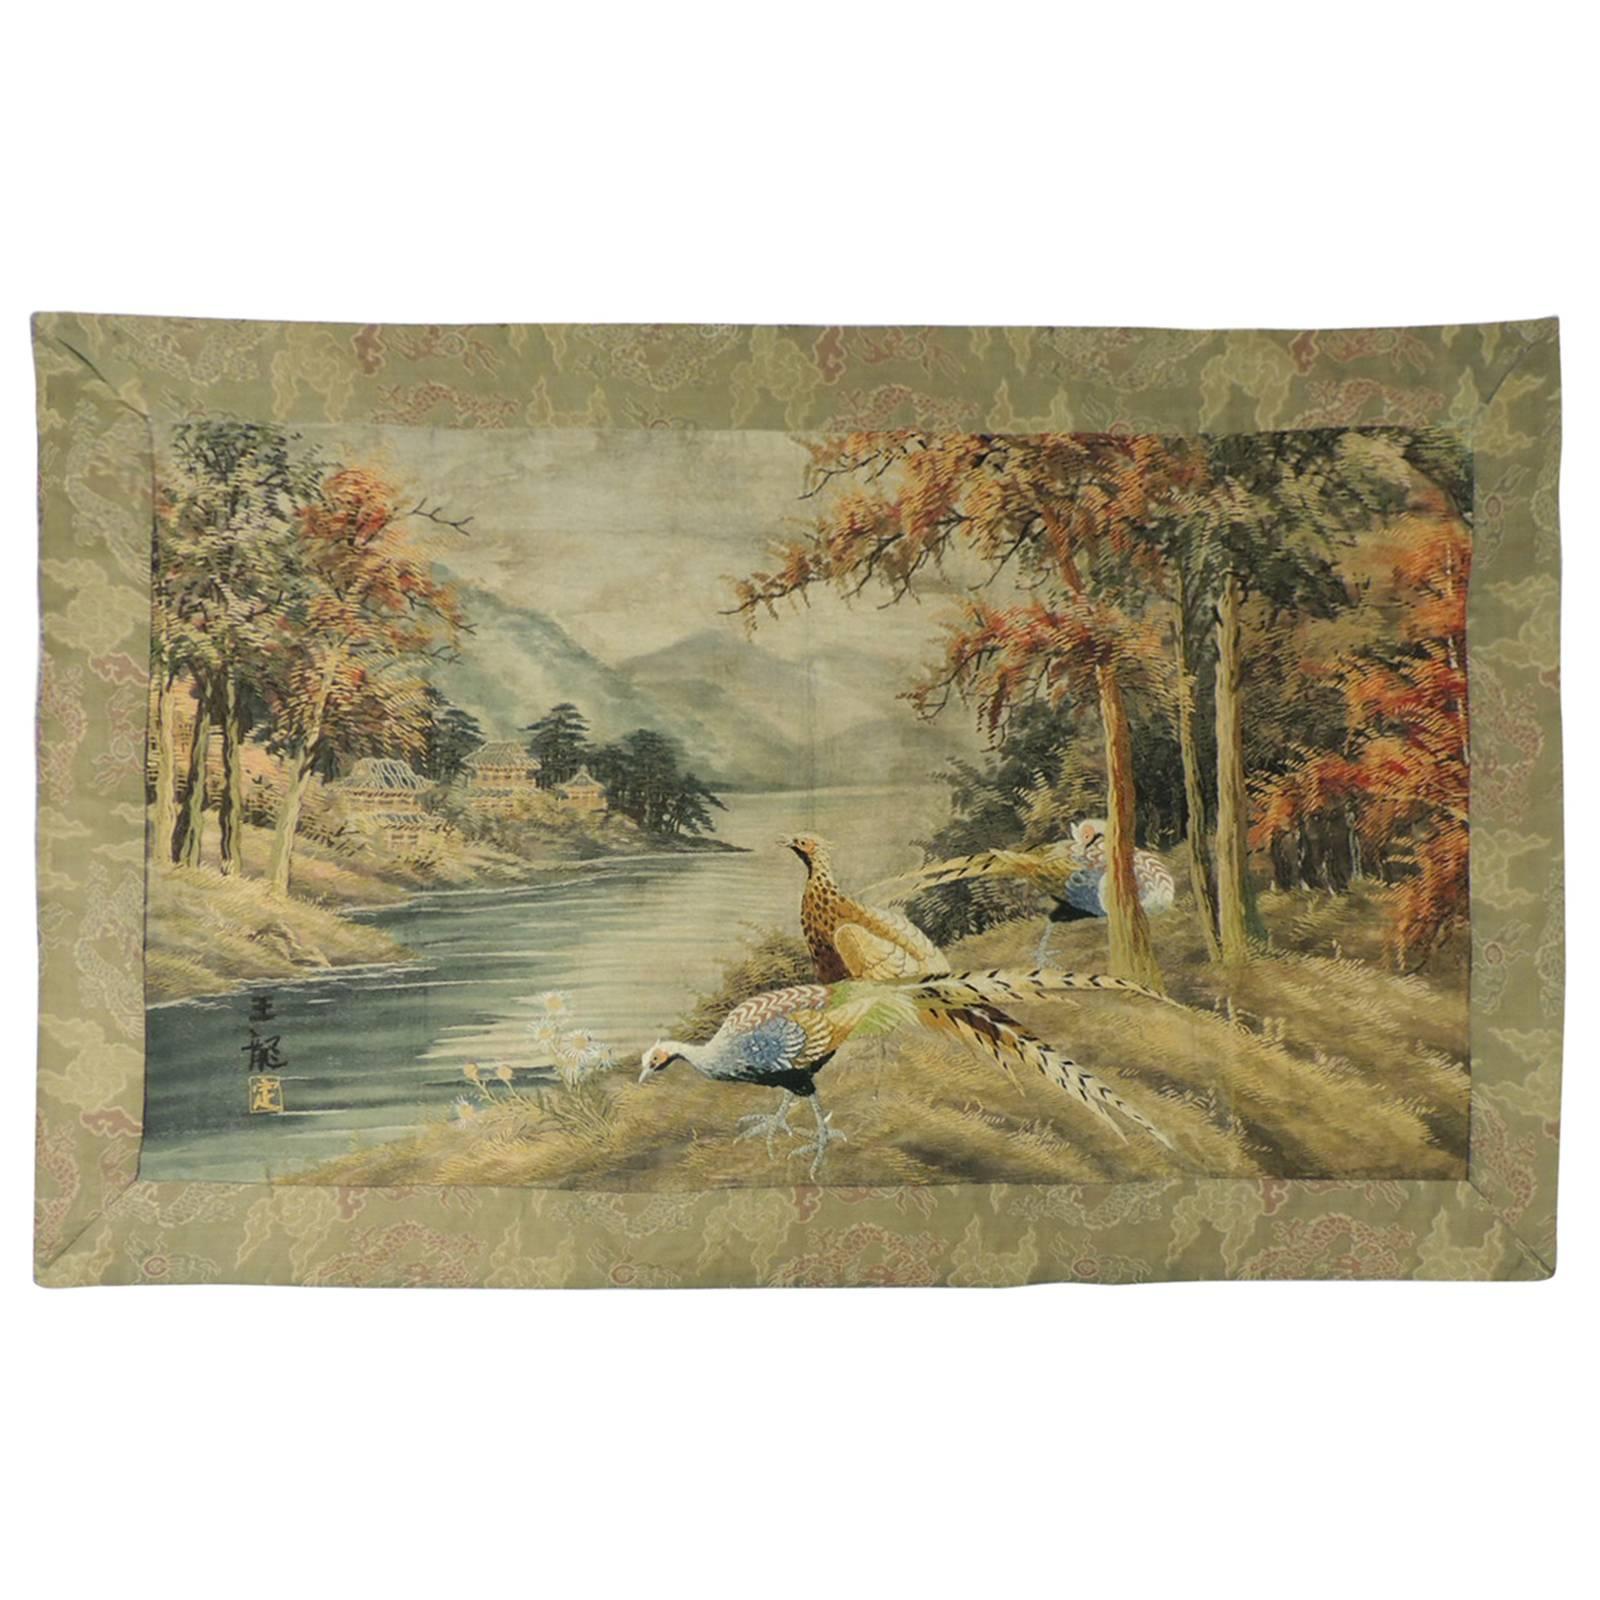 CLOSE OUT SALE: Large Asian Embroidery Scenery Tapestry From Japan